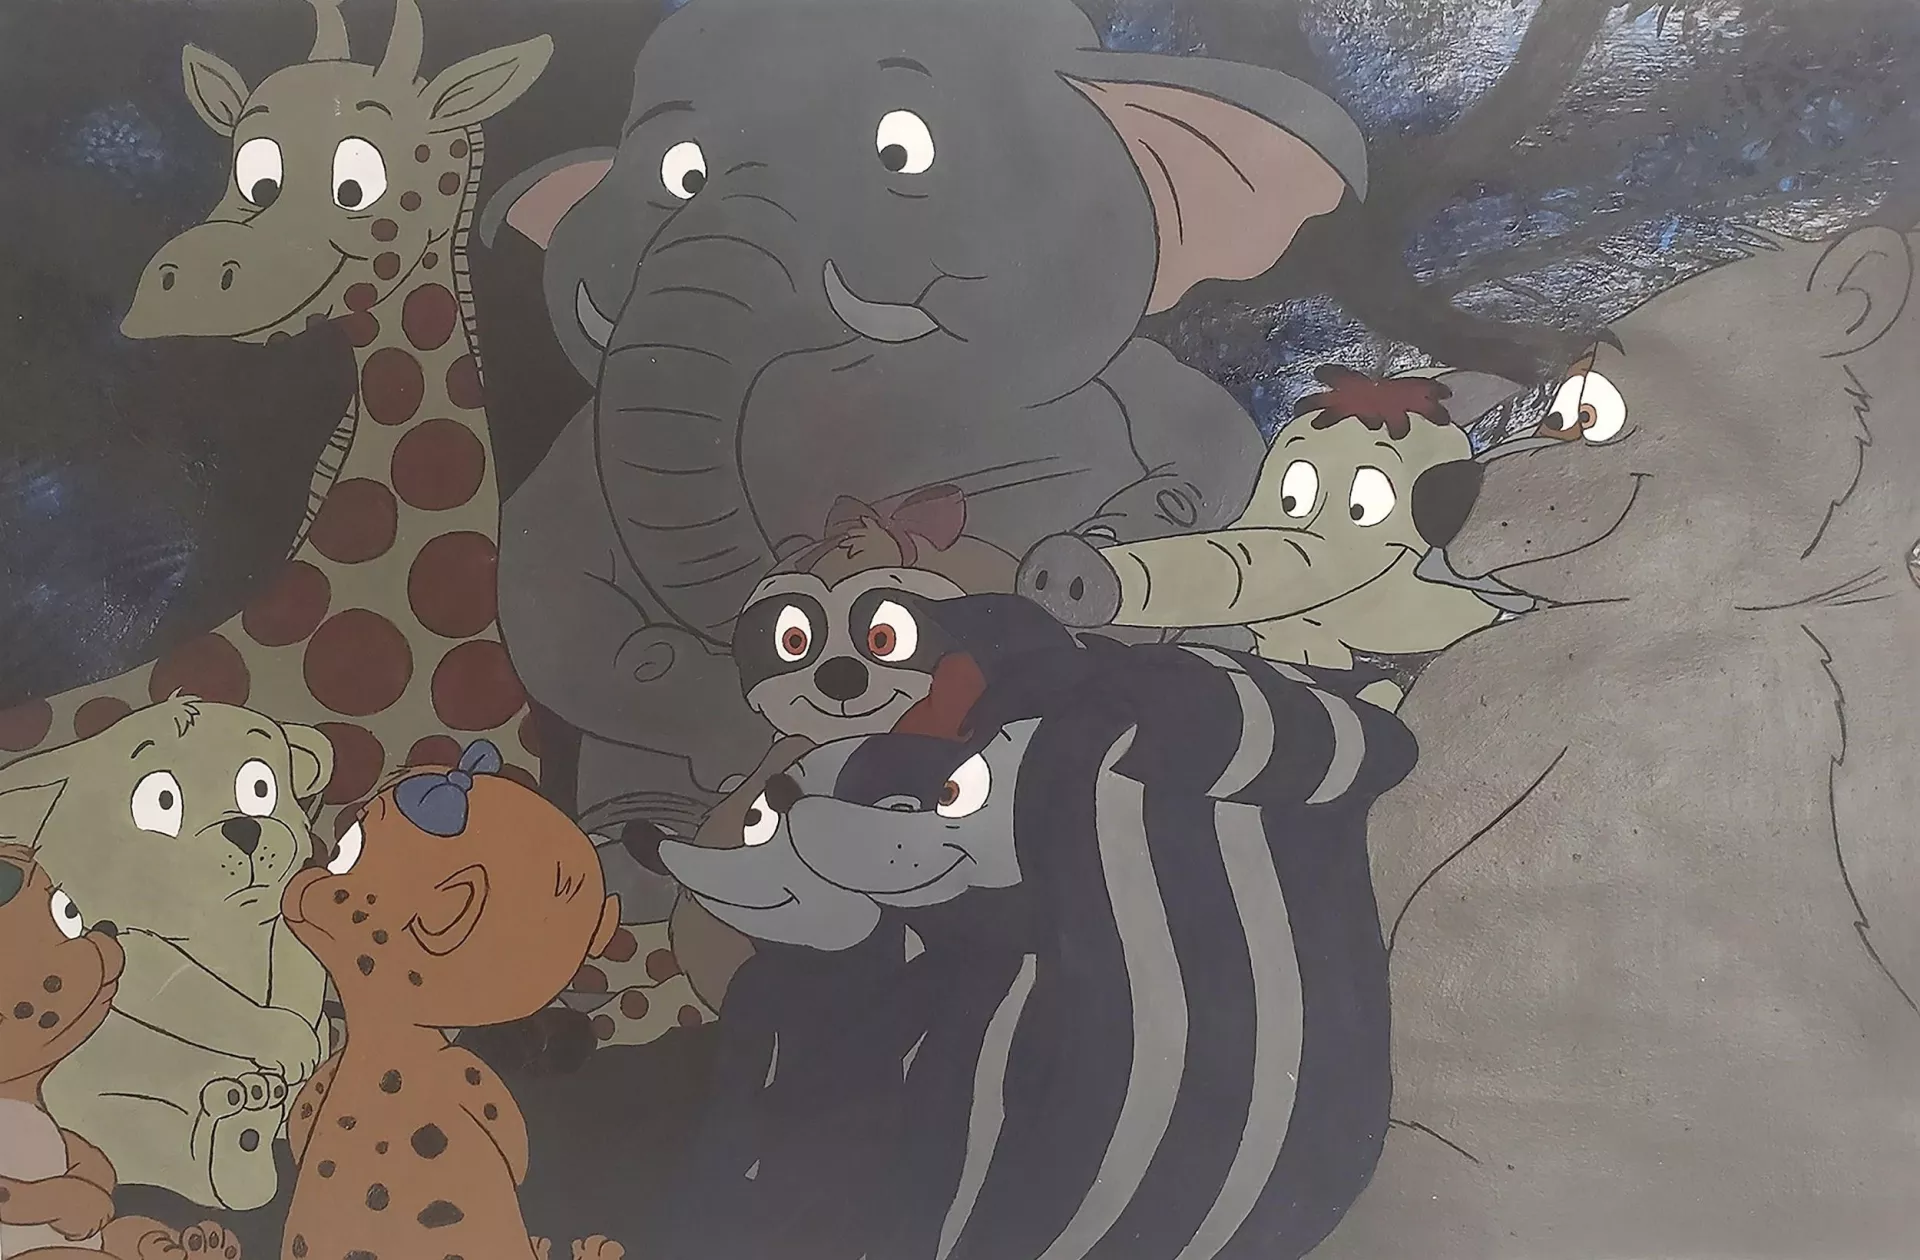 An inspired reimagining from an episode of the radio show “Louis Lion” in which various animals gather at night around Louis the lion as he tells a story.  The whites of the animal’s eyes are wide-eyed as they listen to the story.